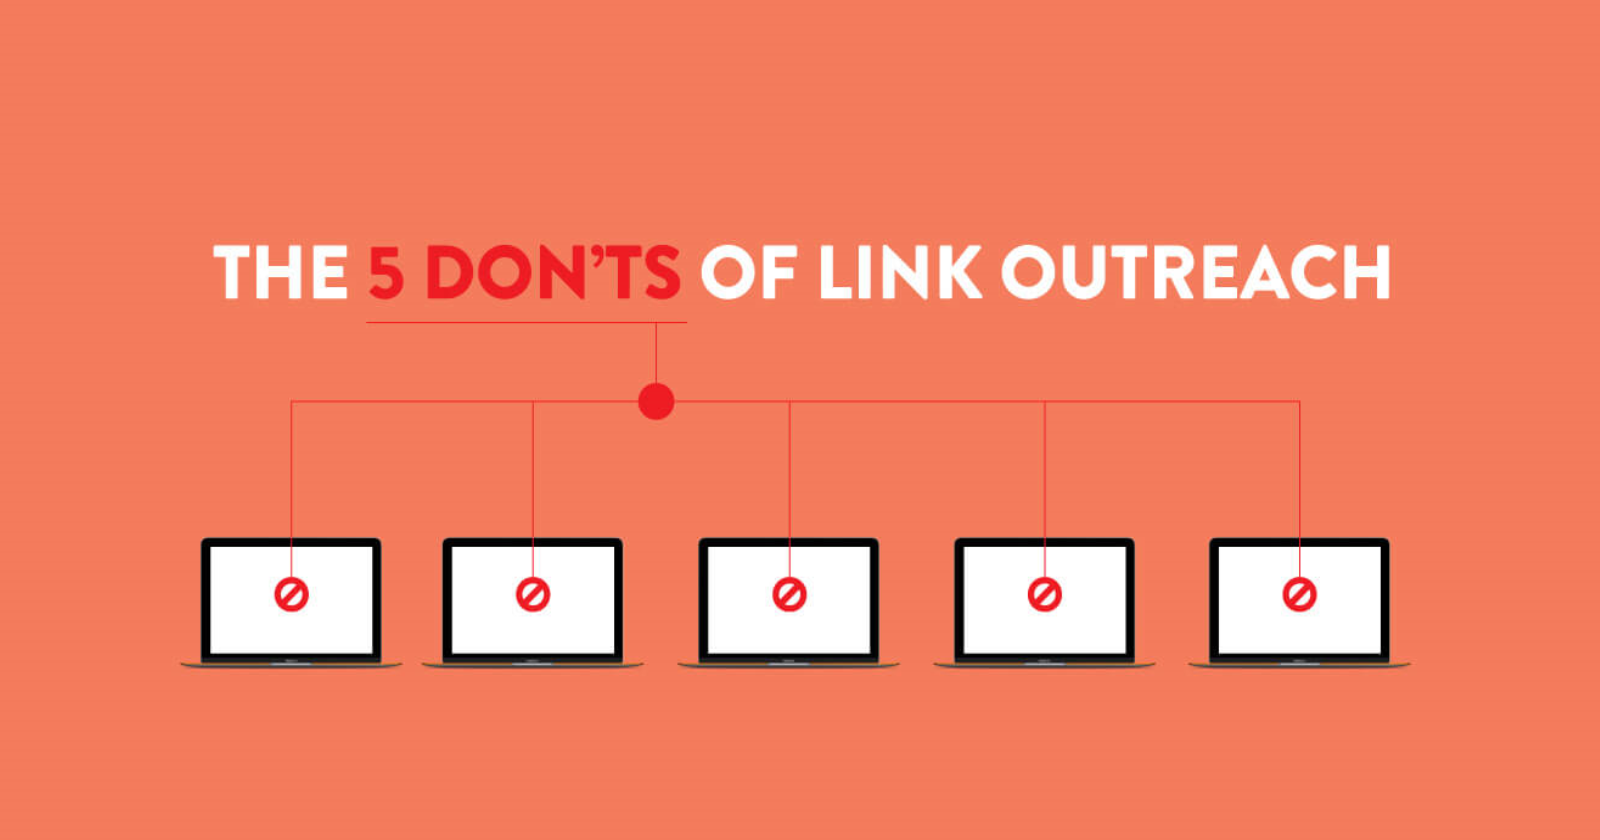 the 5 donts of link outreach